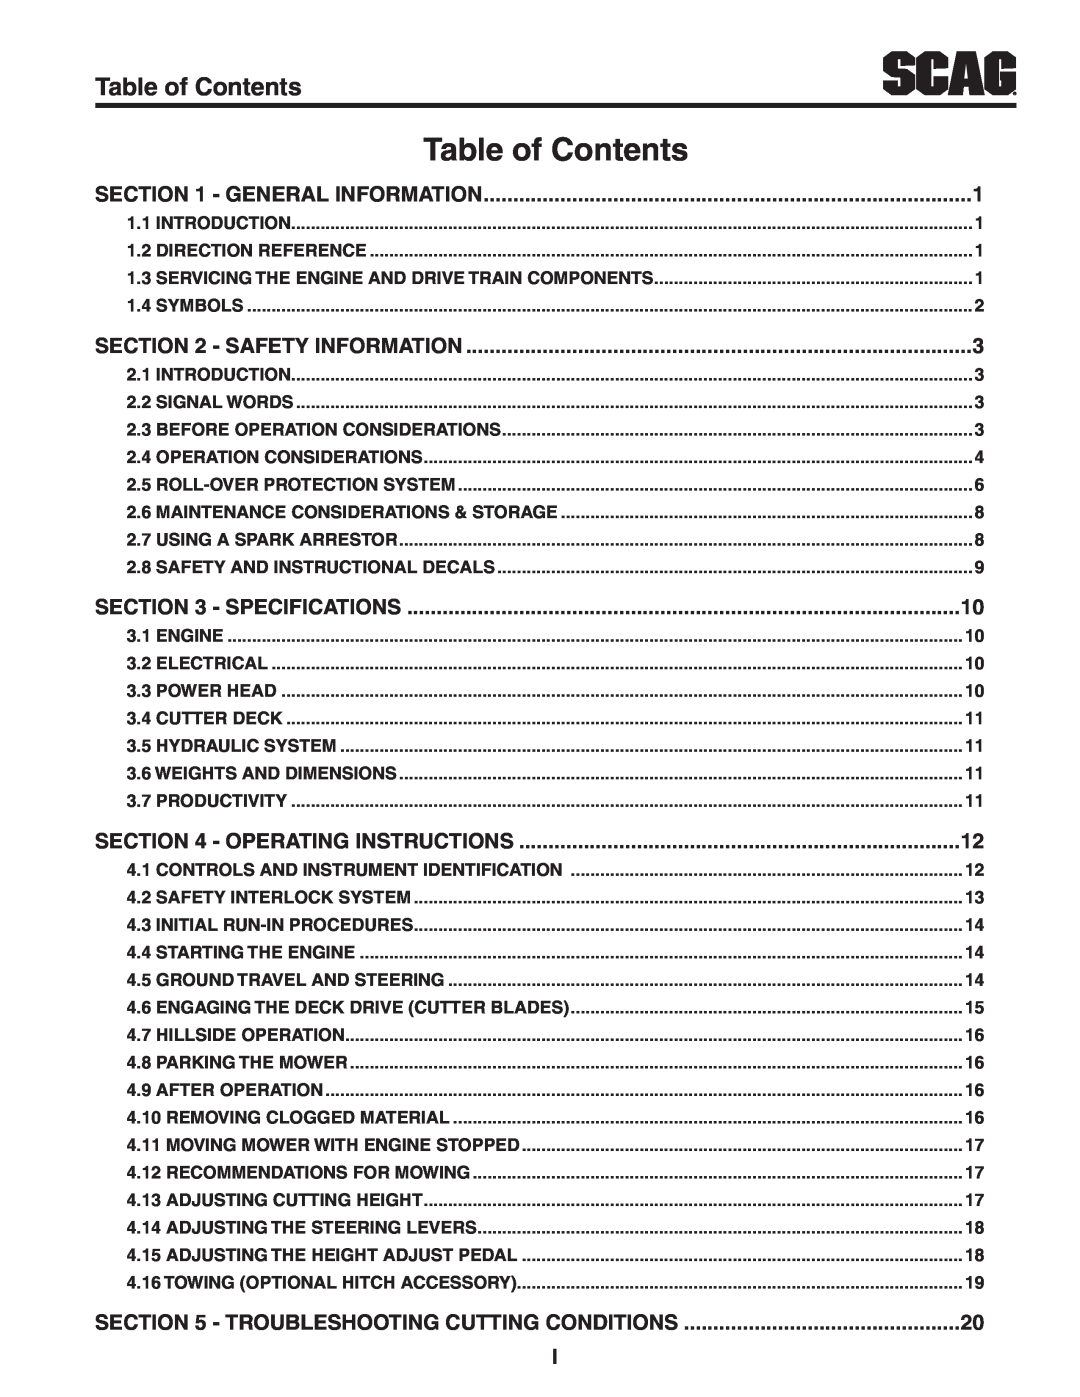 Scag Power Equipment STT-31EFI-SS Table of Contents, General Information, Safety Information, Specifications 